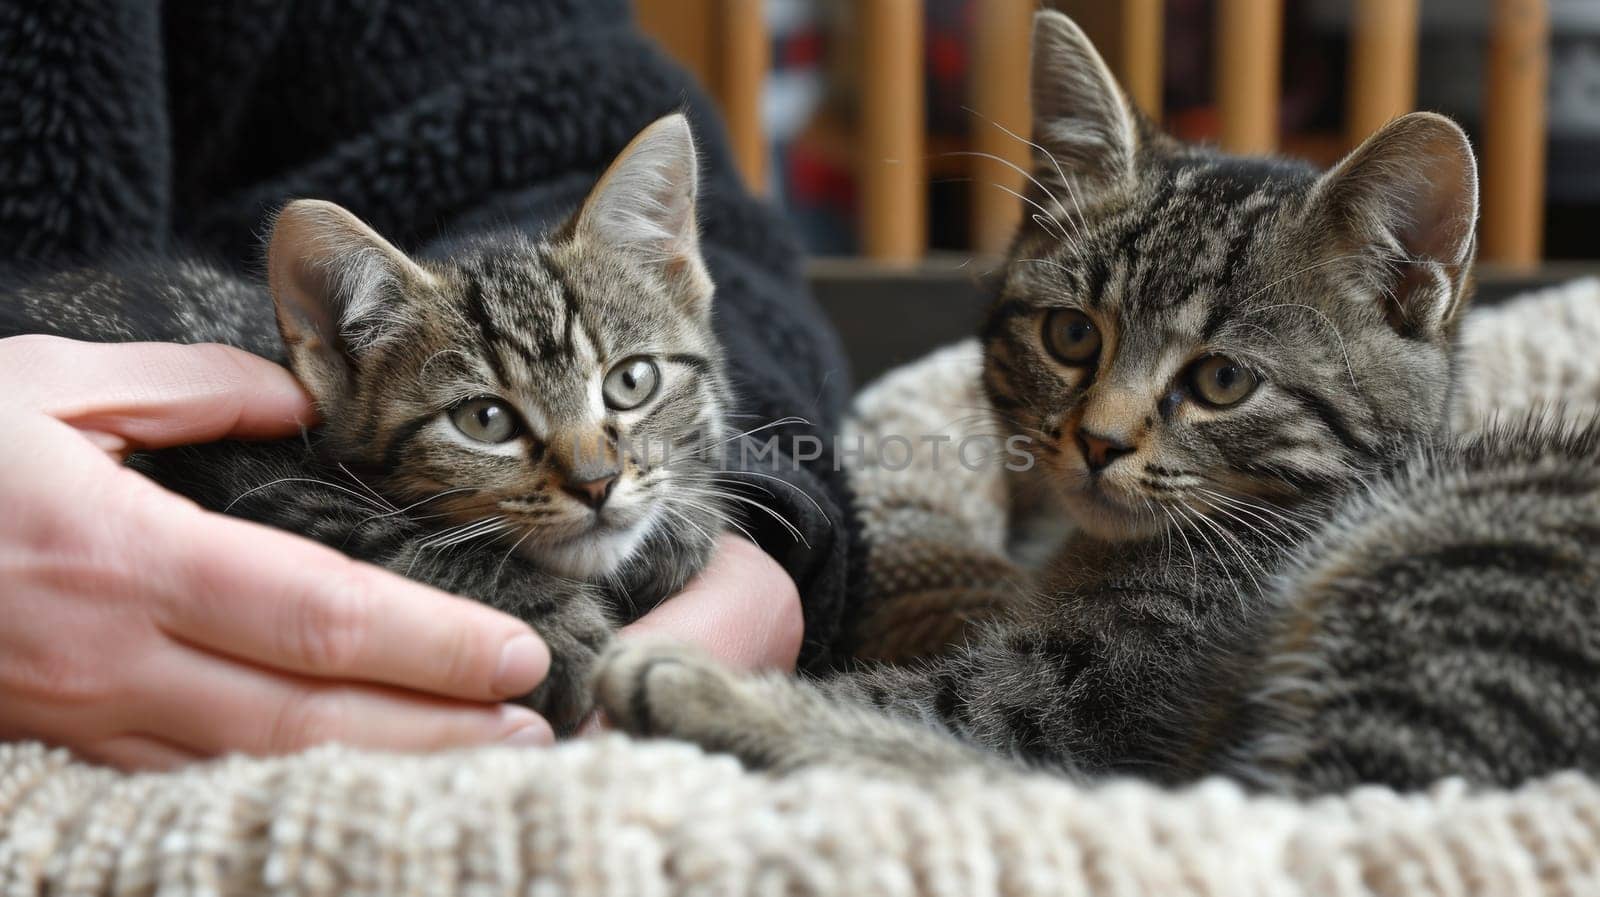 Two small gray and white striped kittens sitting on a blanket, AI by starush